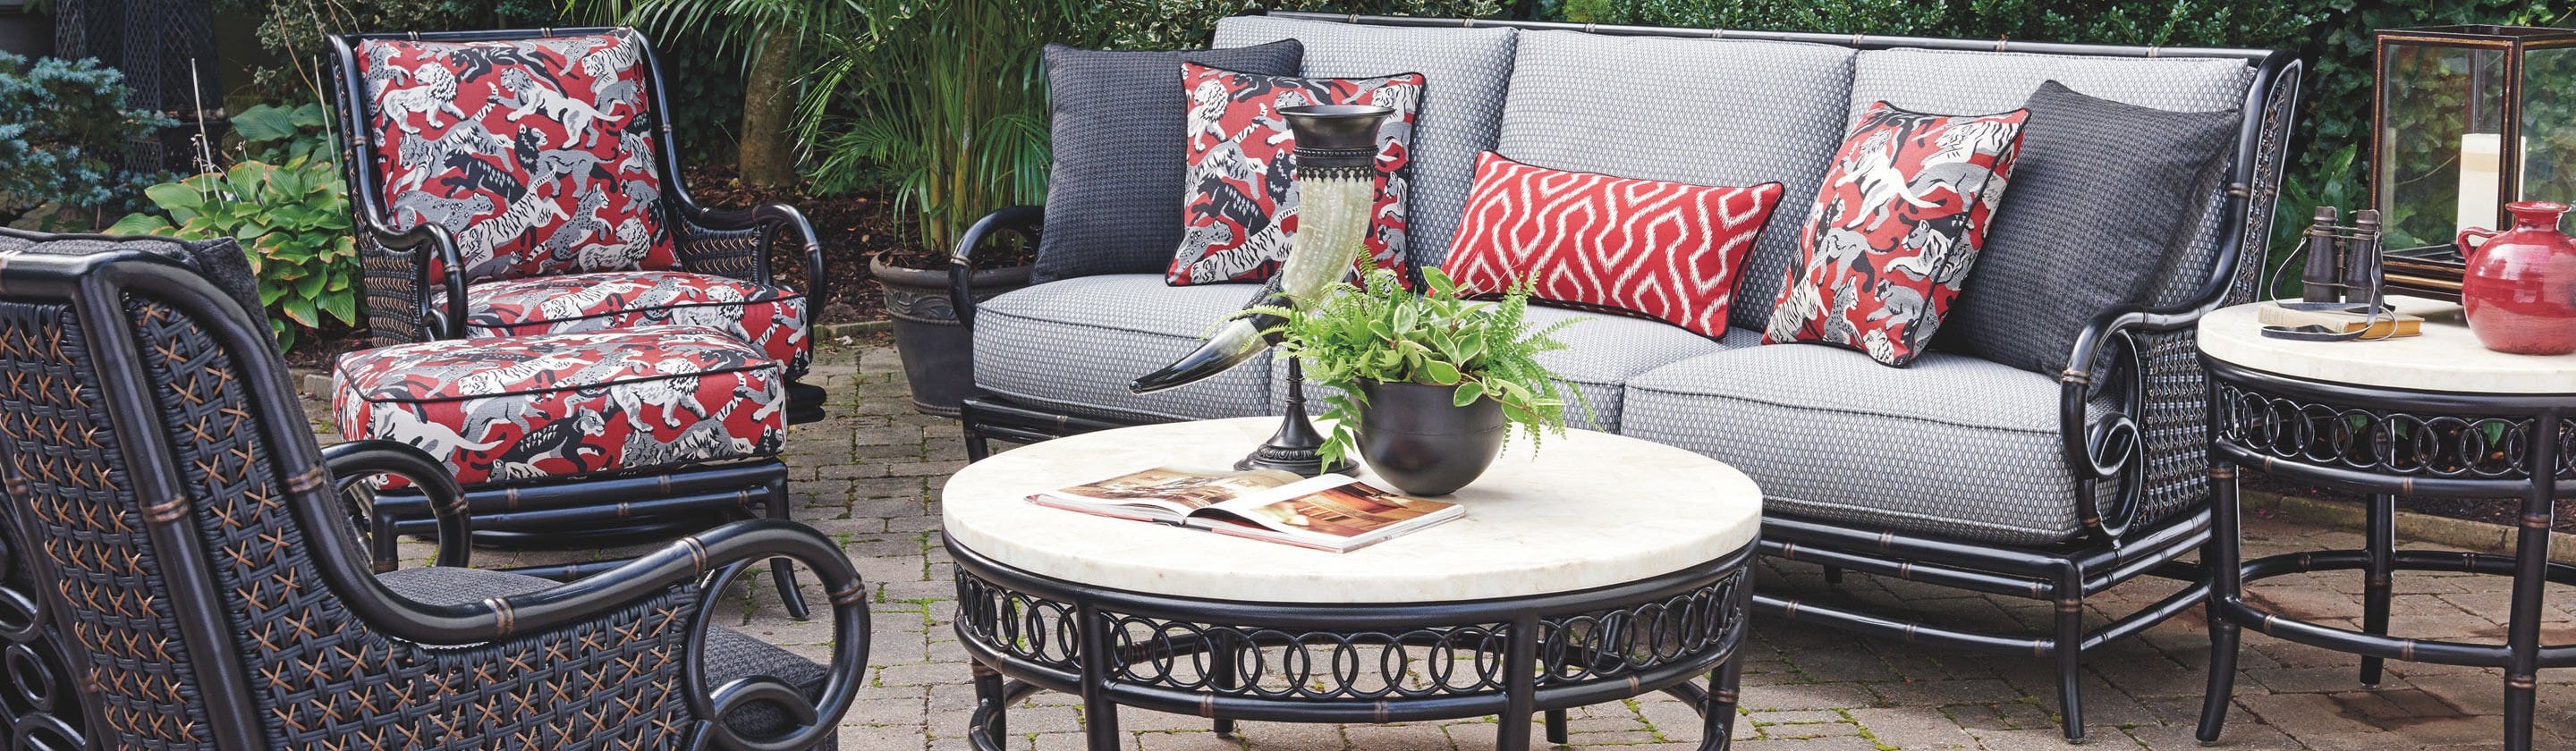 Outdoor Patio Furniture Ing Guide - Watsons Outdoor Furniture Louisville Ky